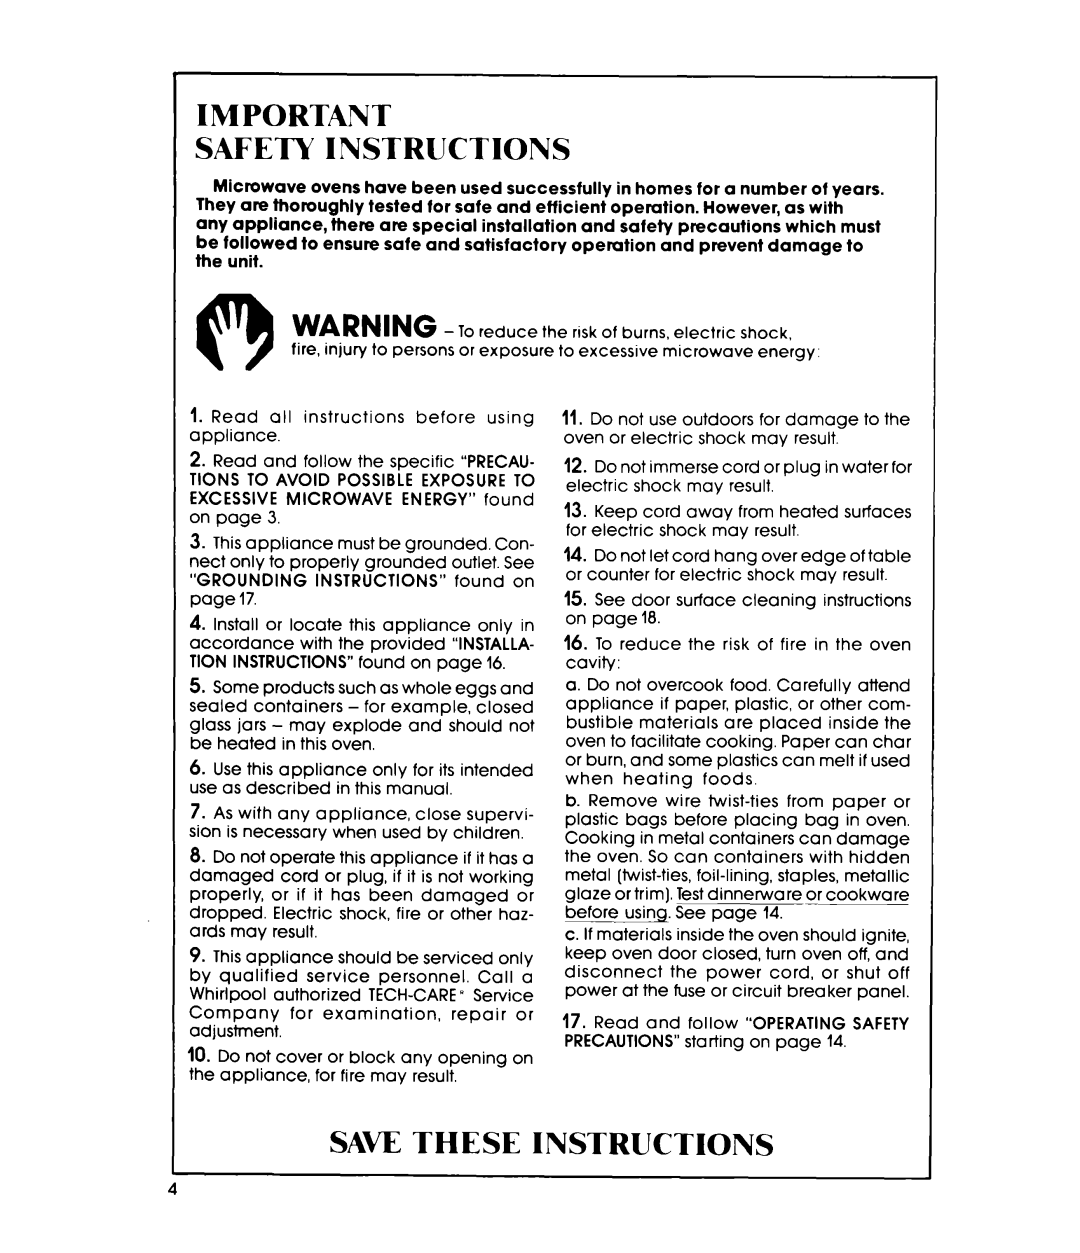 Whirlpool MW8500XP manual Safety Instructions, Saw These Instructions 